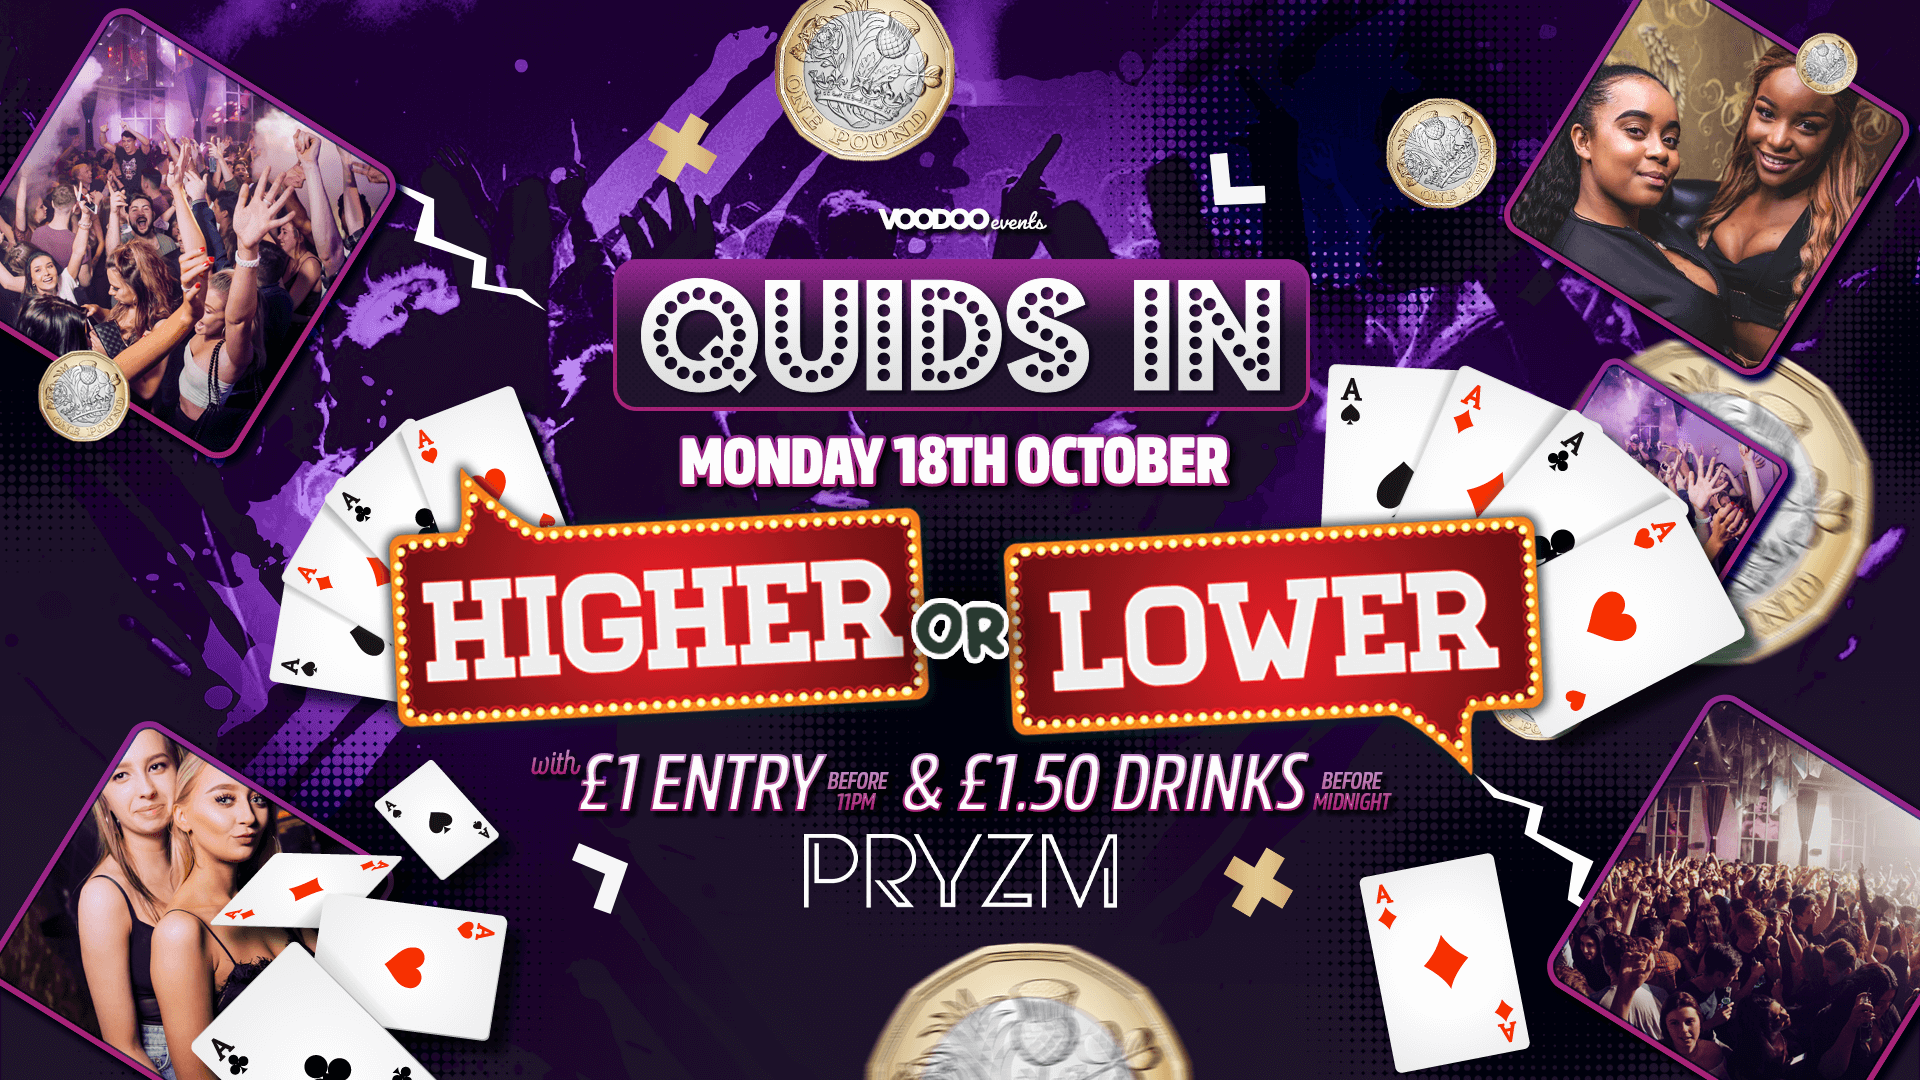 Quids In Mondays – Higher or Lower at PRYZM – 18th October